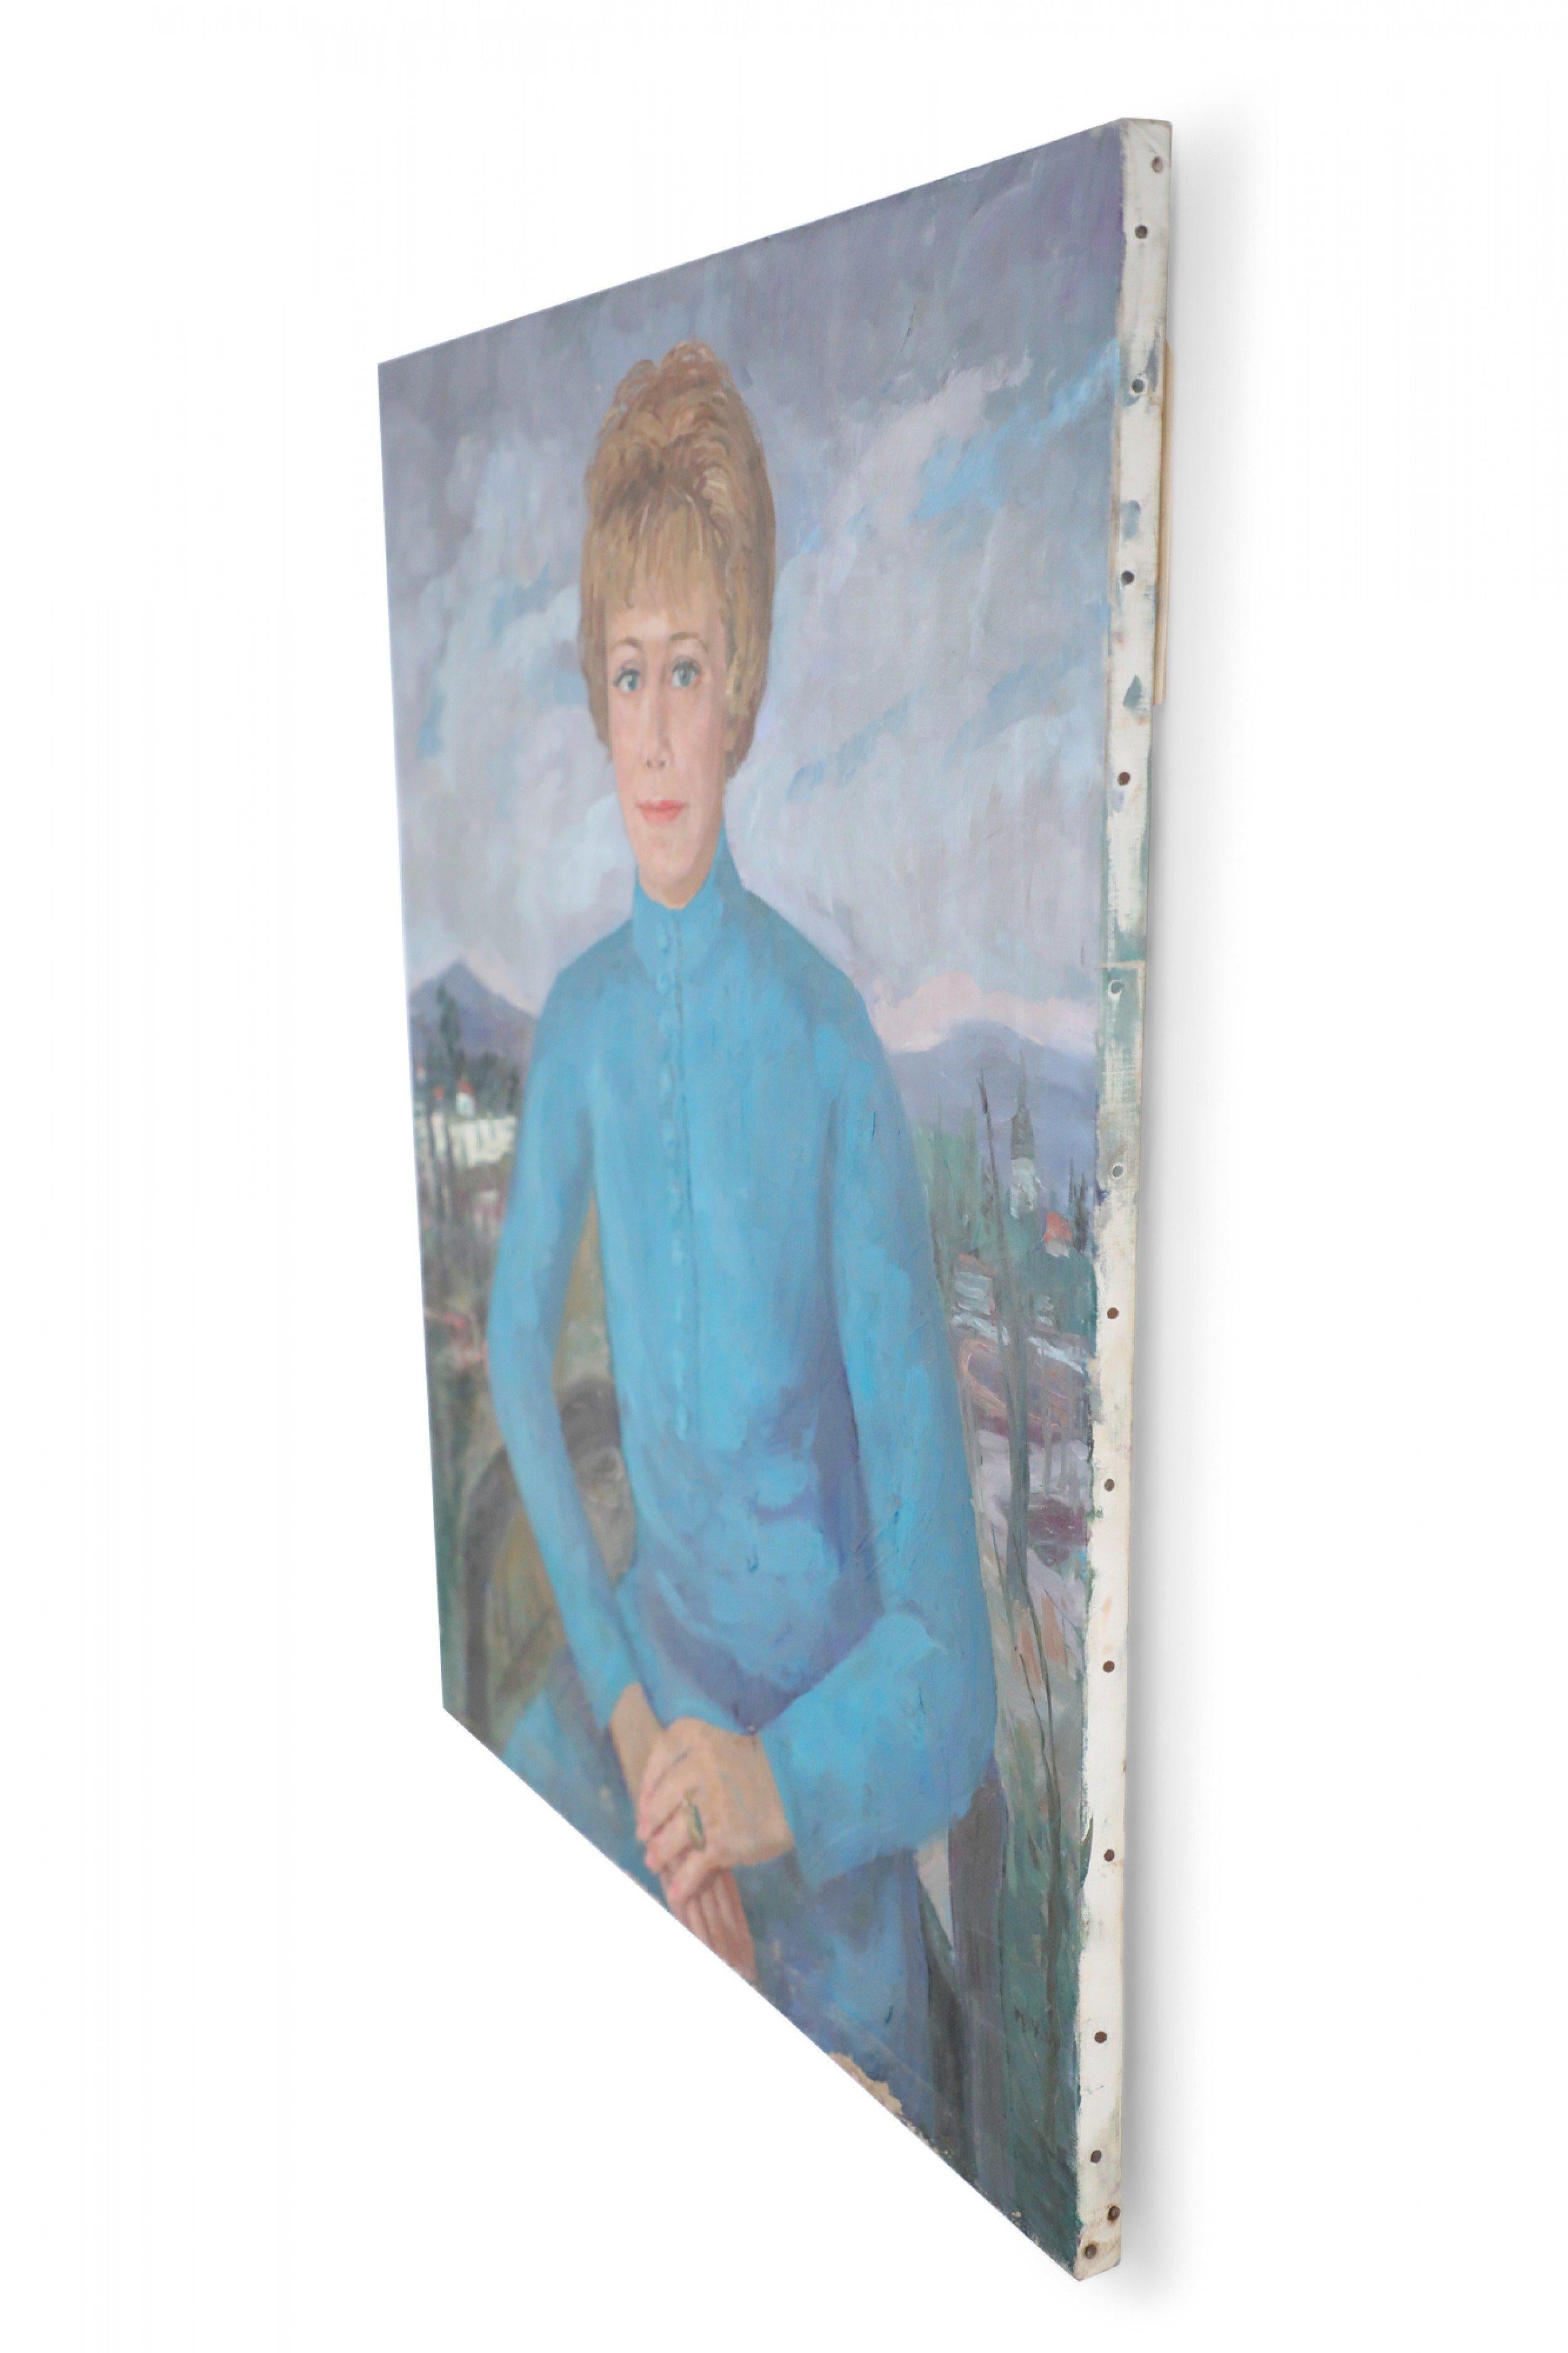 American Portrait of a Woman in a Blue Dress Painting on Canvas For Sale